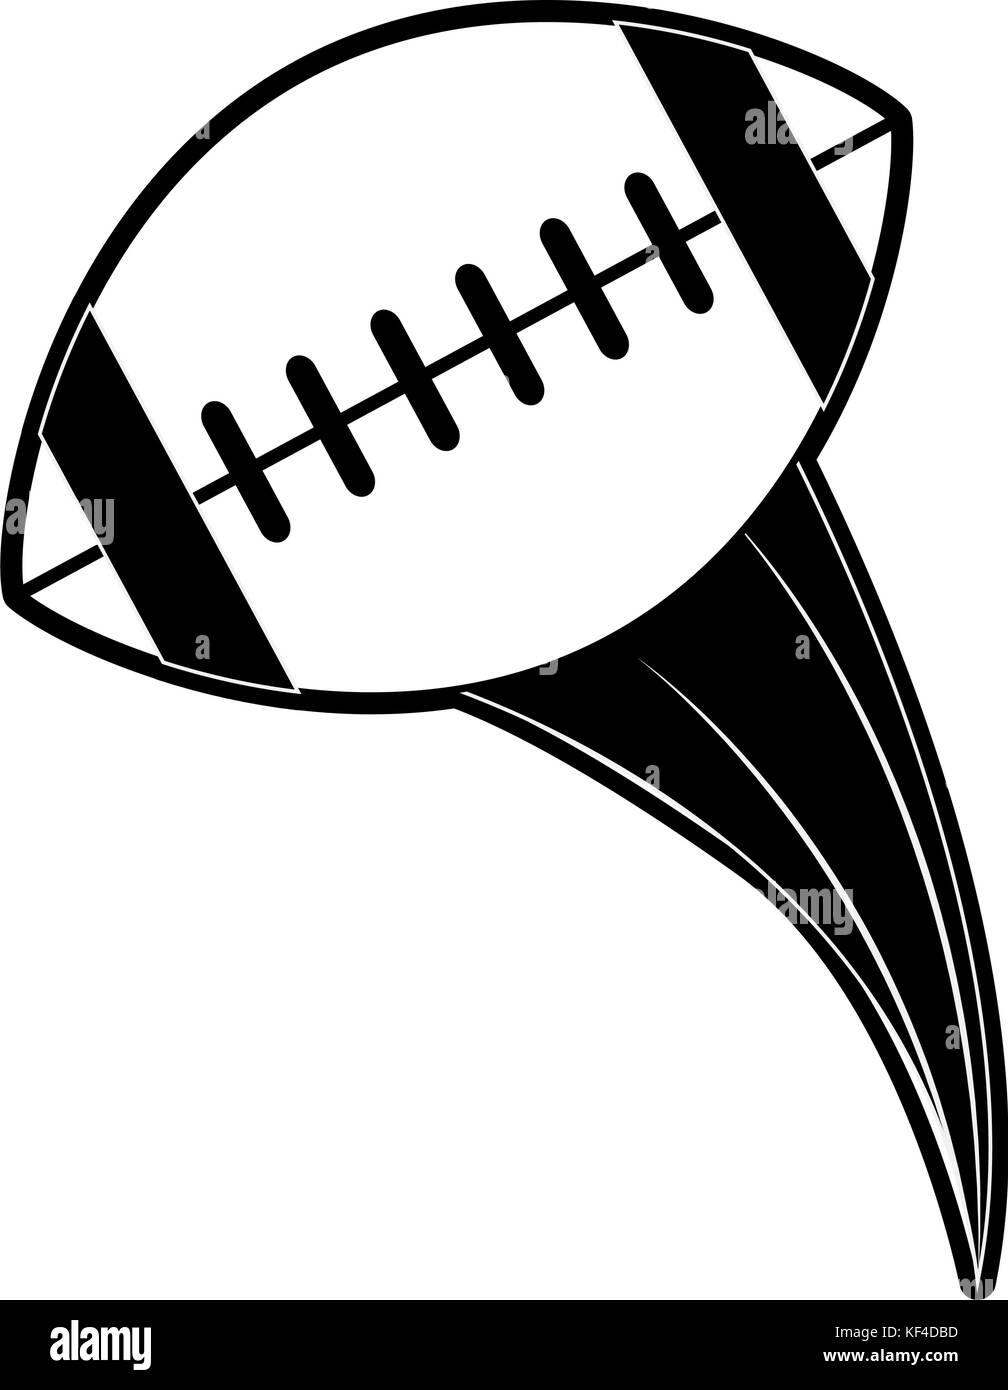 american football related icon image Stock Vector